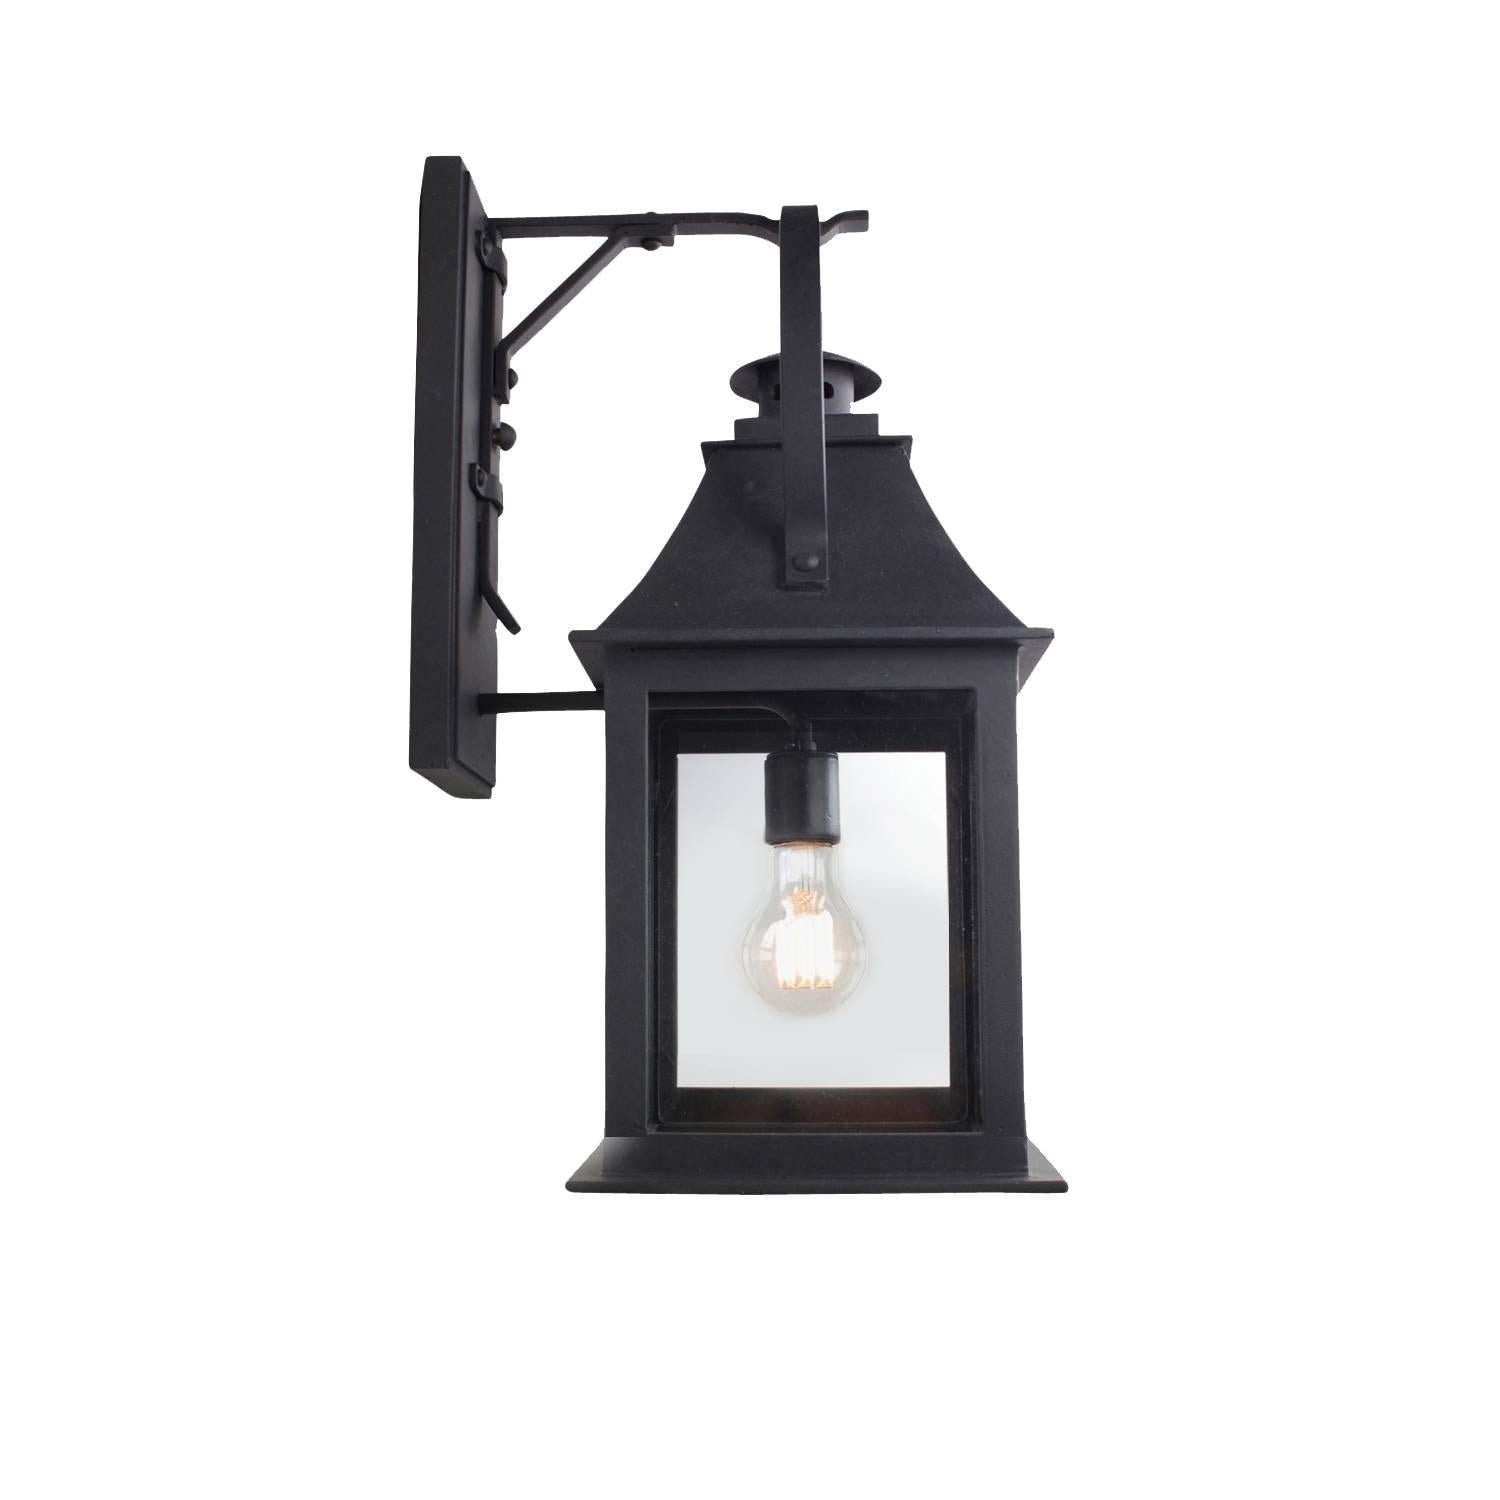 This lantern references both old and new with Classic features including a stove pipe top and oversized hoop, juxtaposed with modern lines and open glass panels. Hand-forged in heavy gauge iron.

Backplate dimensions (inches): 5 W x 12 H
Lantern